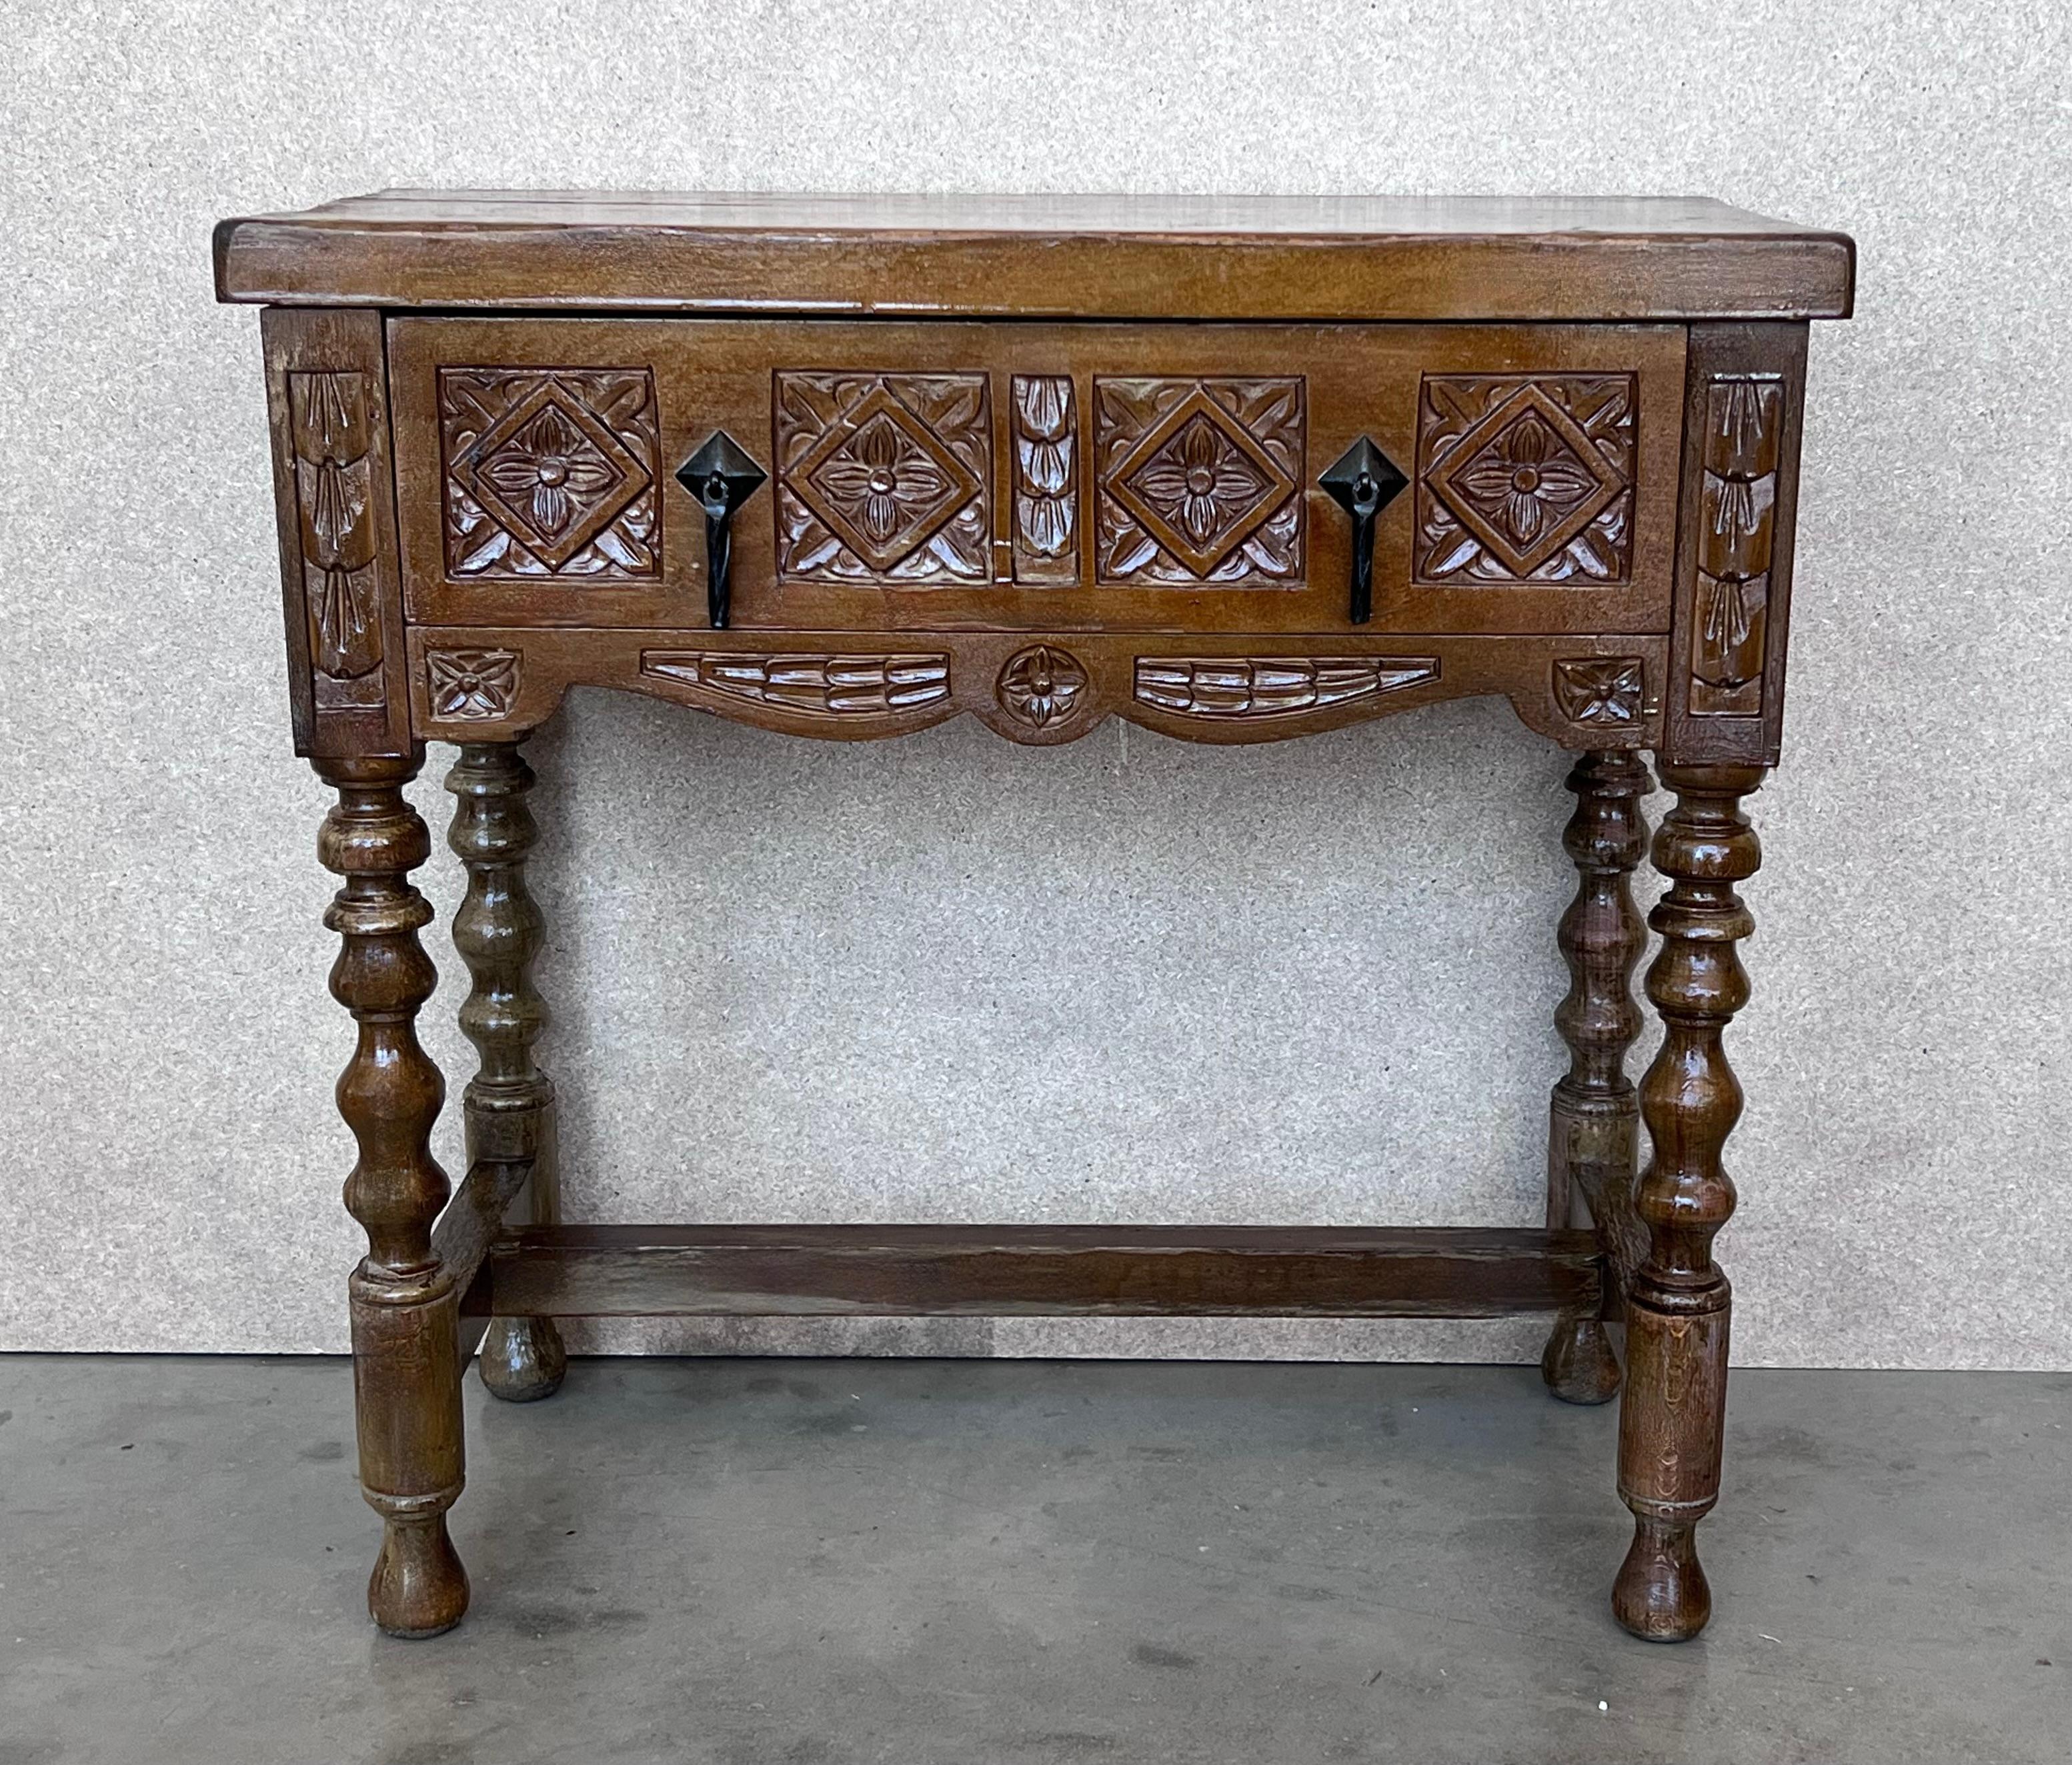 20th century pair of Spanish nightstands or console table with one drawer and iron hardware.
The table has beautiful carved drawers with original iron pull.
Beautiful tables that you can use like a nightstands or side tables, end tables or table